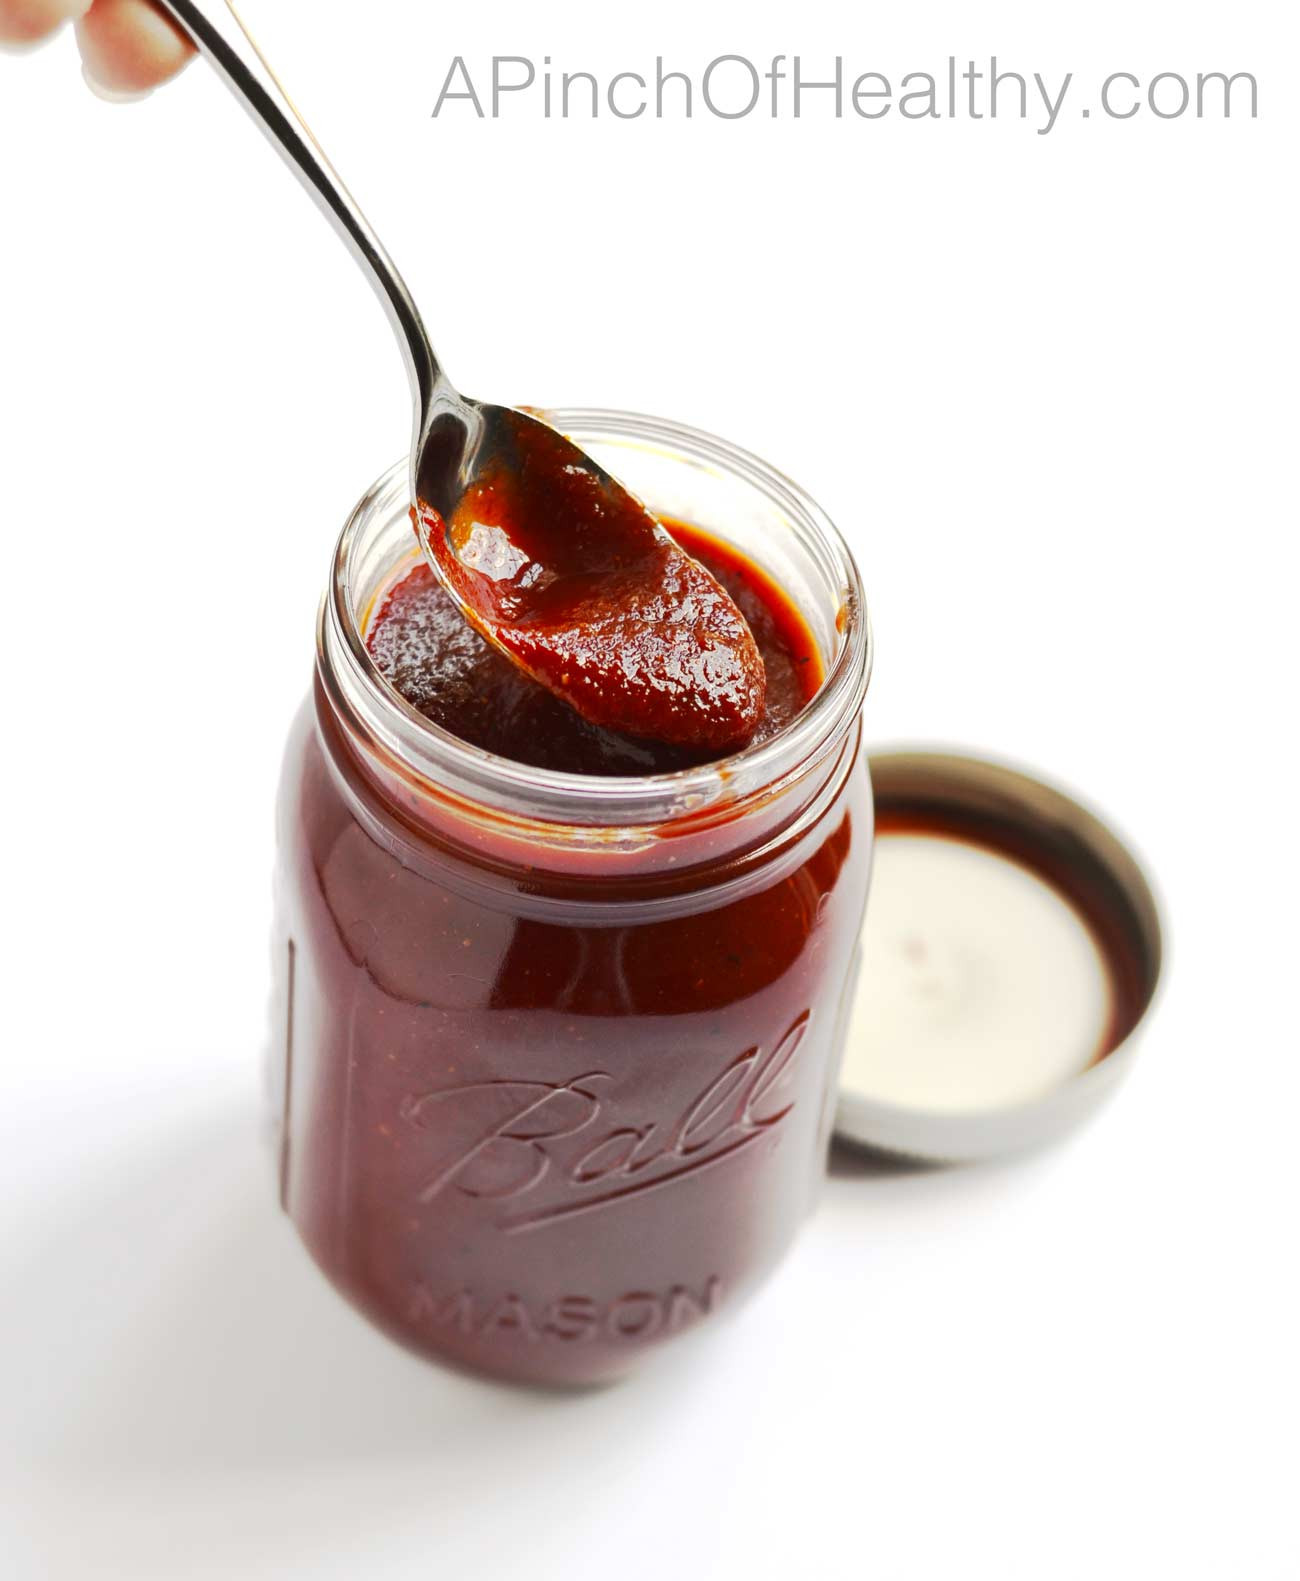 Sweet Baby Ray Bbq Sauce Recipe
 Copycat Sweet Baby Ray s BBQ Sauce Made from Scratch A